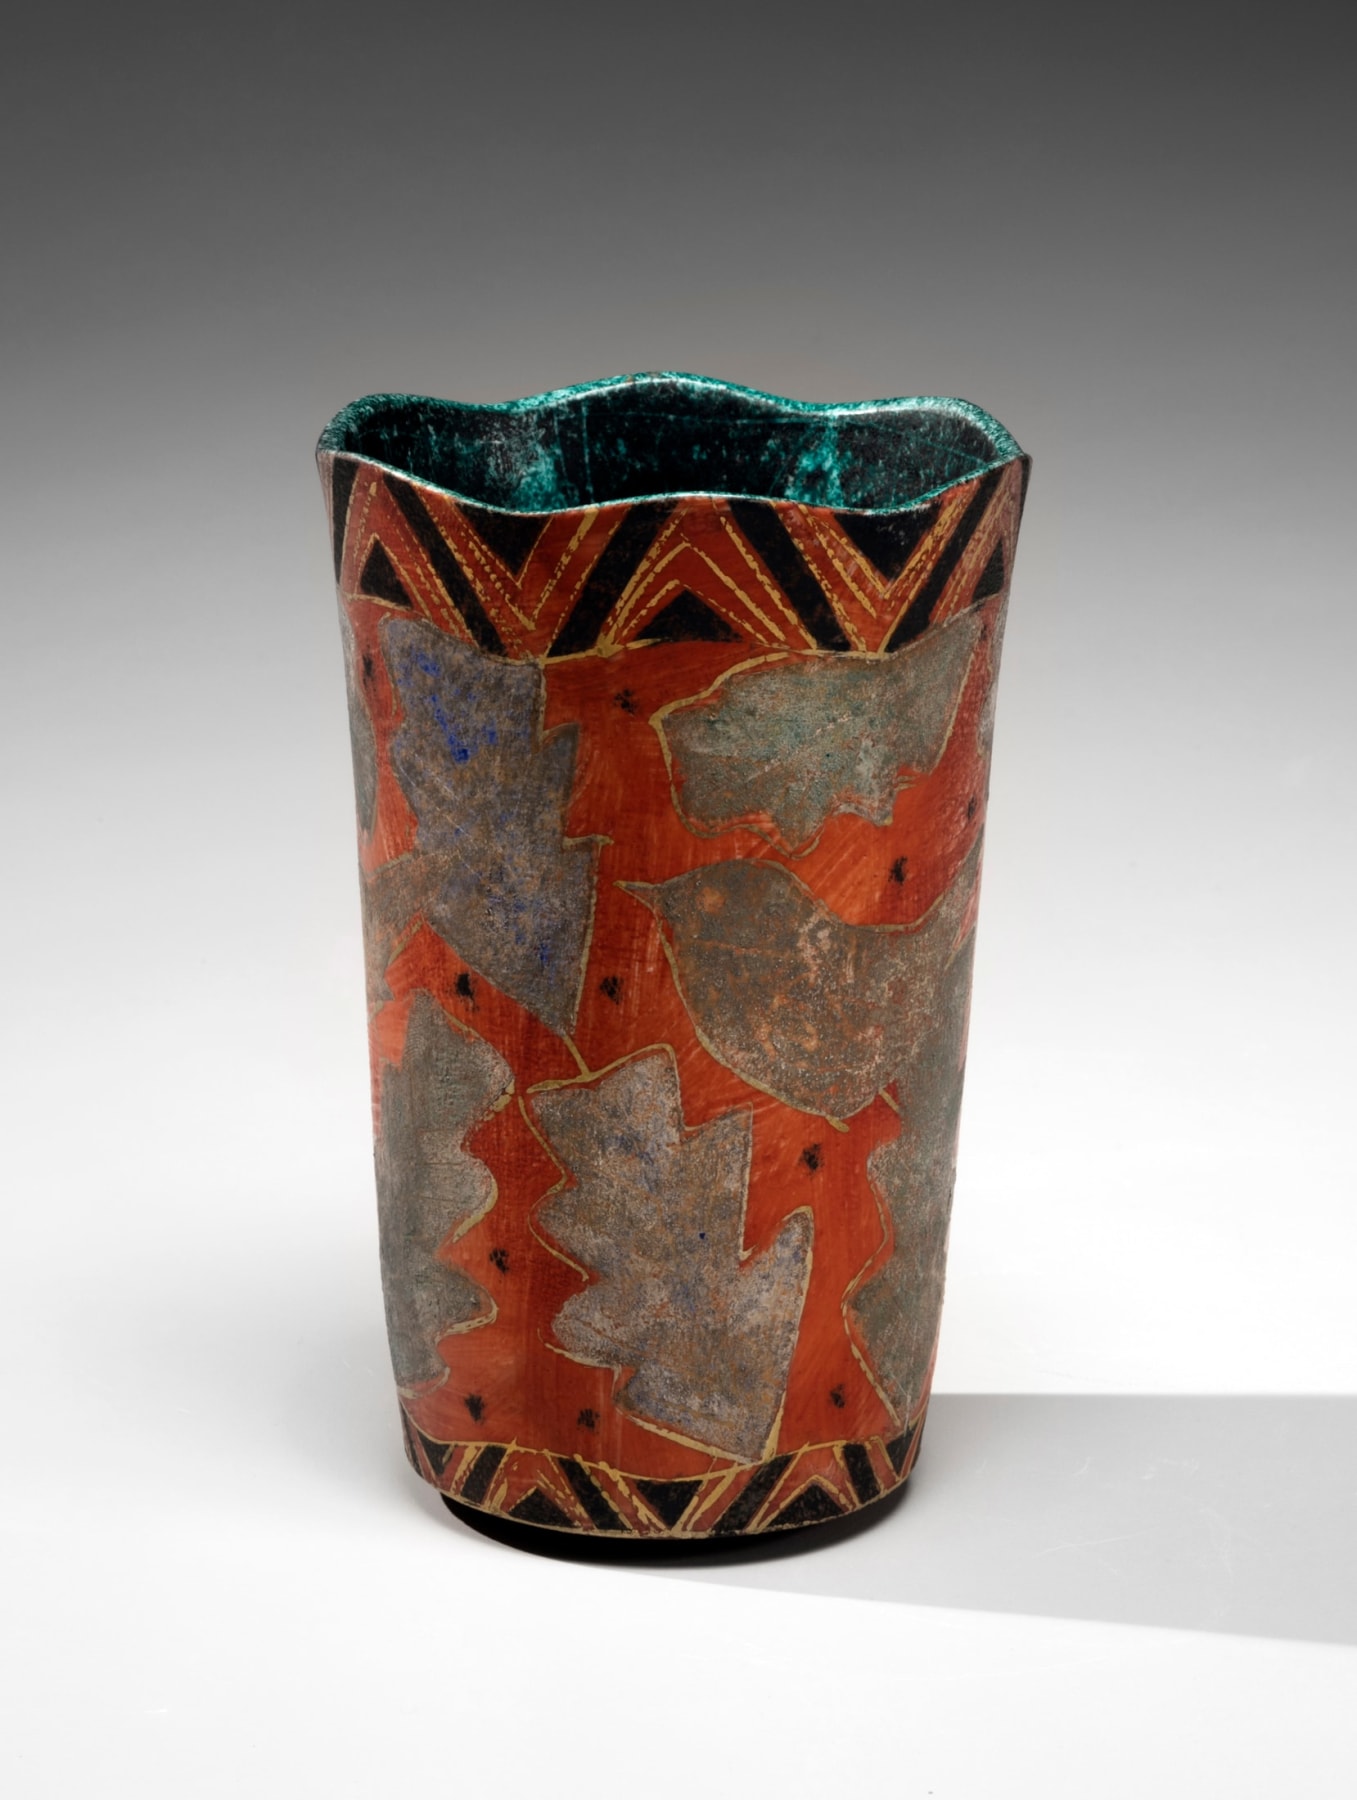 Cylindrical vase with scalloped mouth and bird-and-oak leaf patterning, ca. 1989